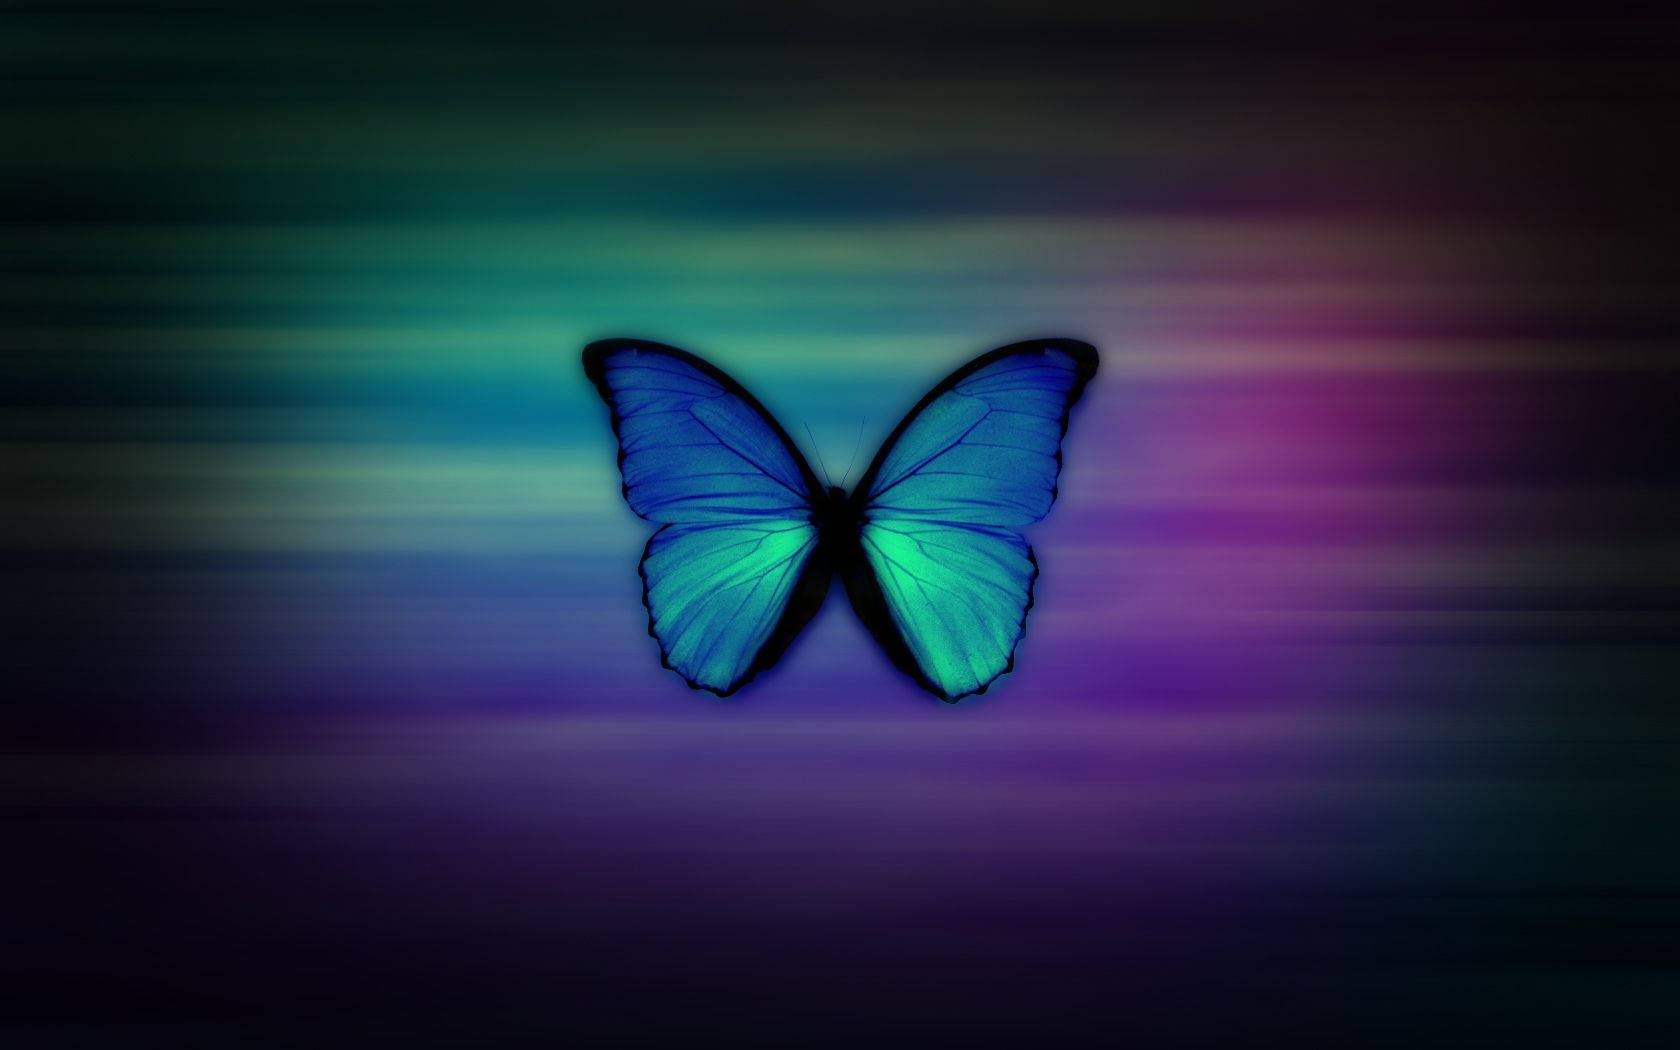 Illuminate Your Style With This Neon Purple & Blue Butterfly Wallpaper